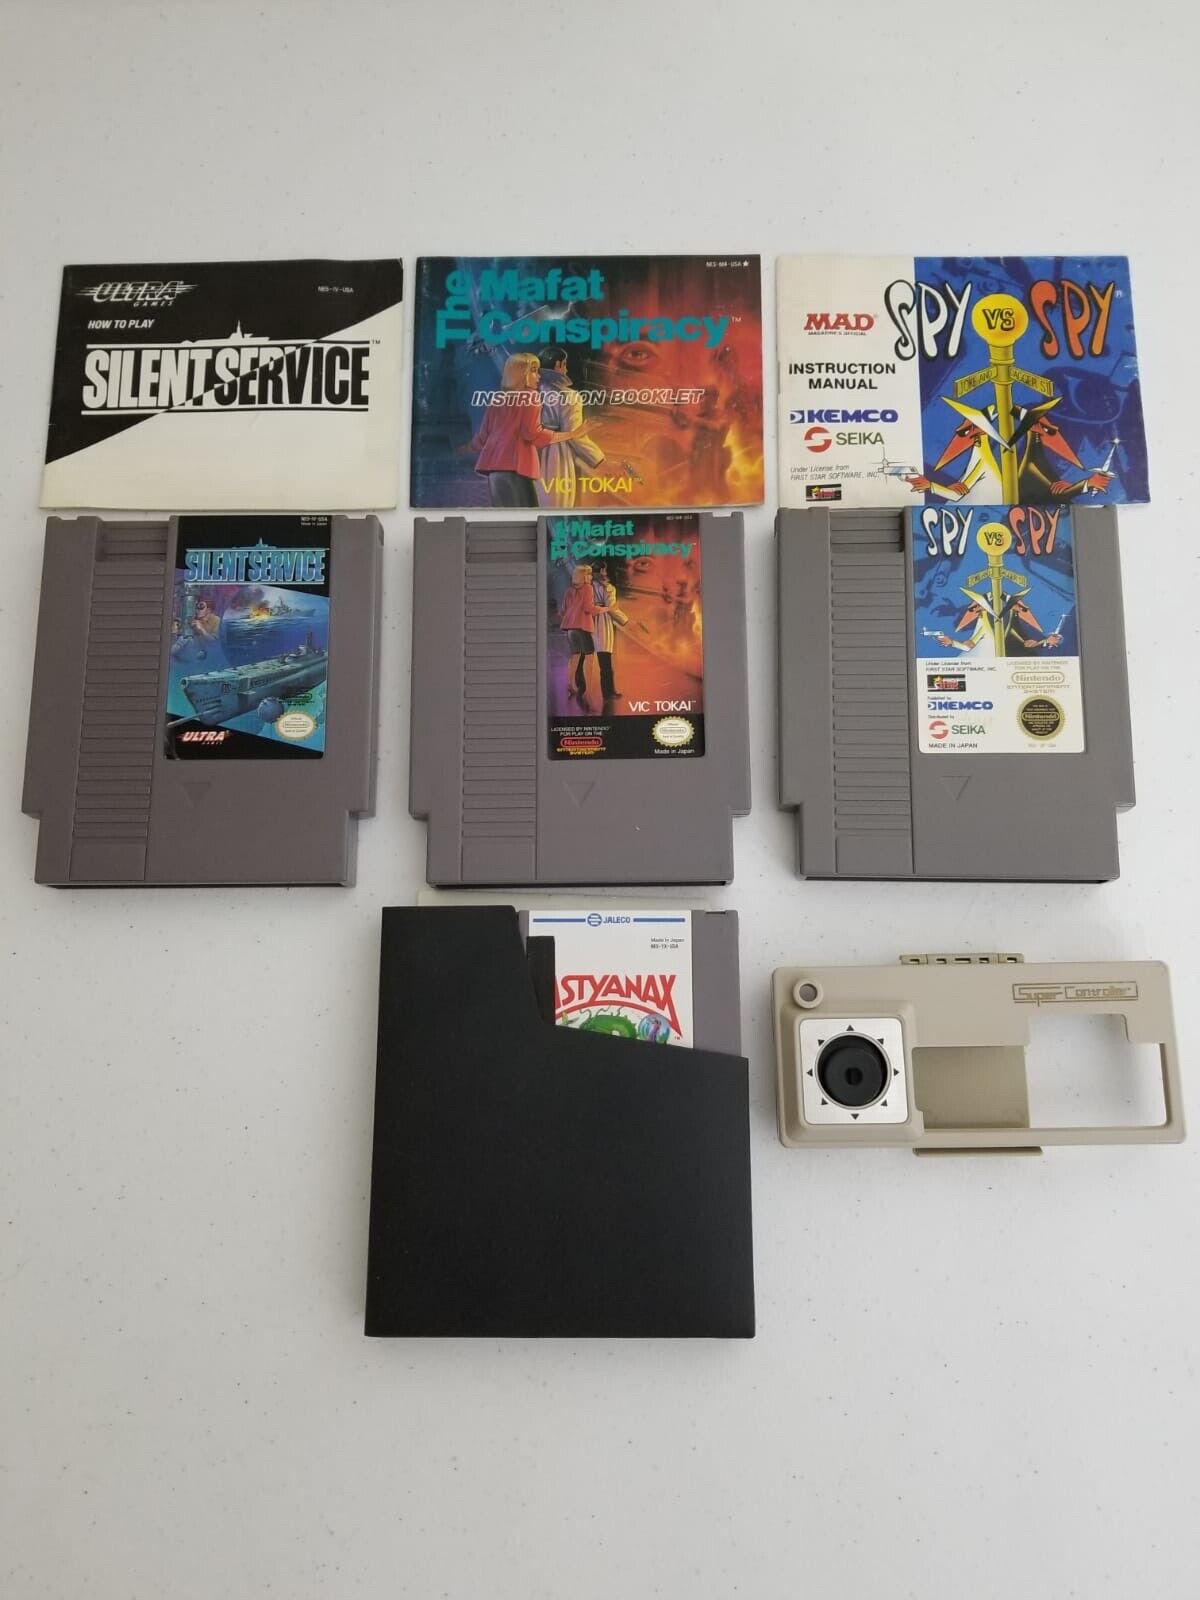 Vintage Nintendo NES Game Lot - Astyanax, Mafat Conspiracy & More - With Manuals & Astyanax Black Pouch - TreasuTiques